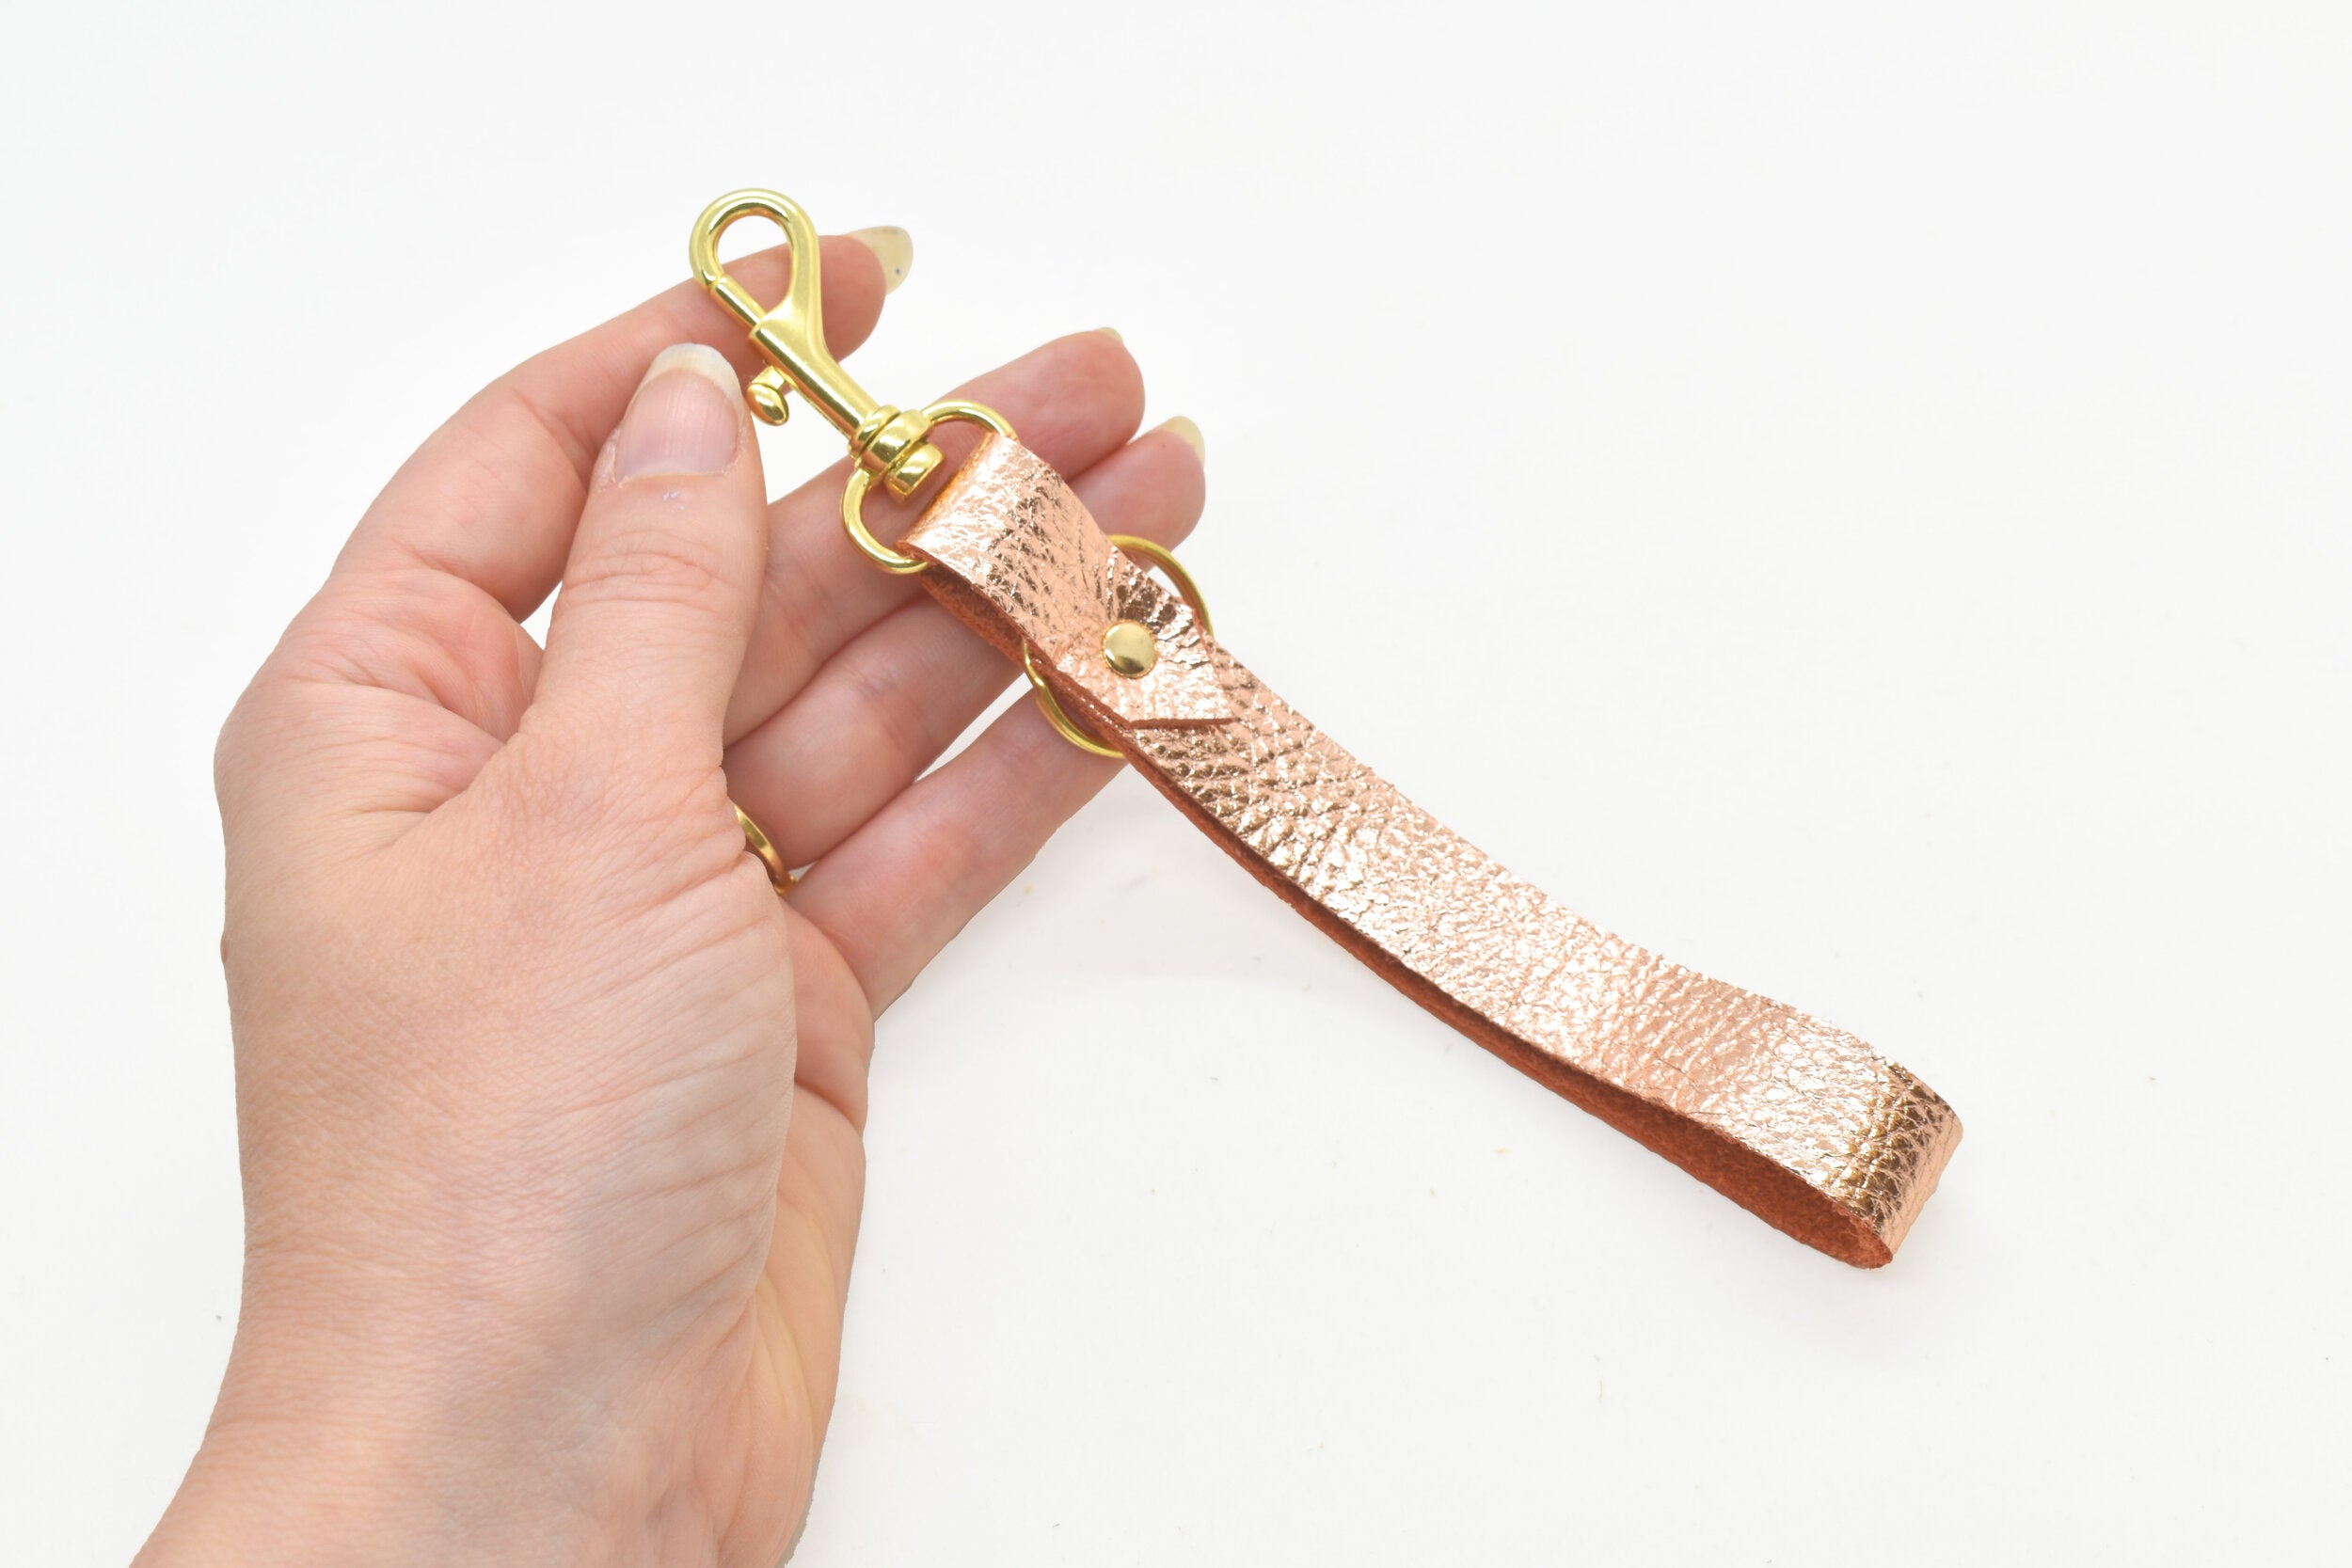 Laroll Bags Rose Gold Keychain - Leather Key Ring